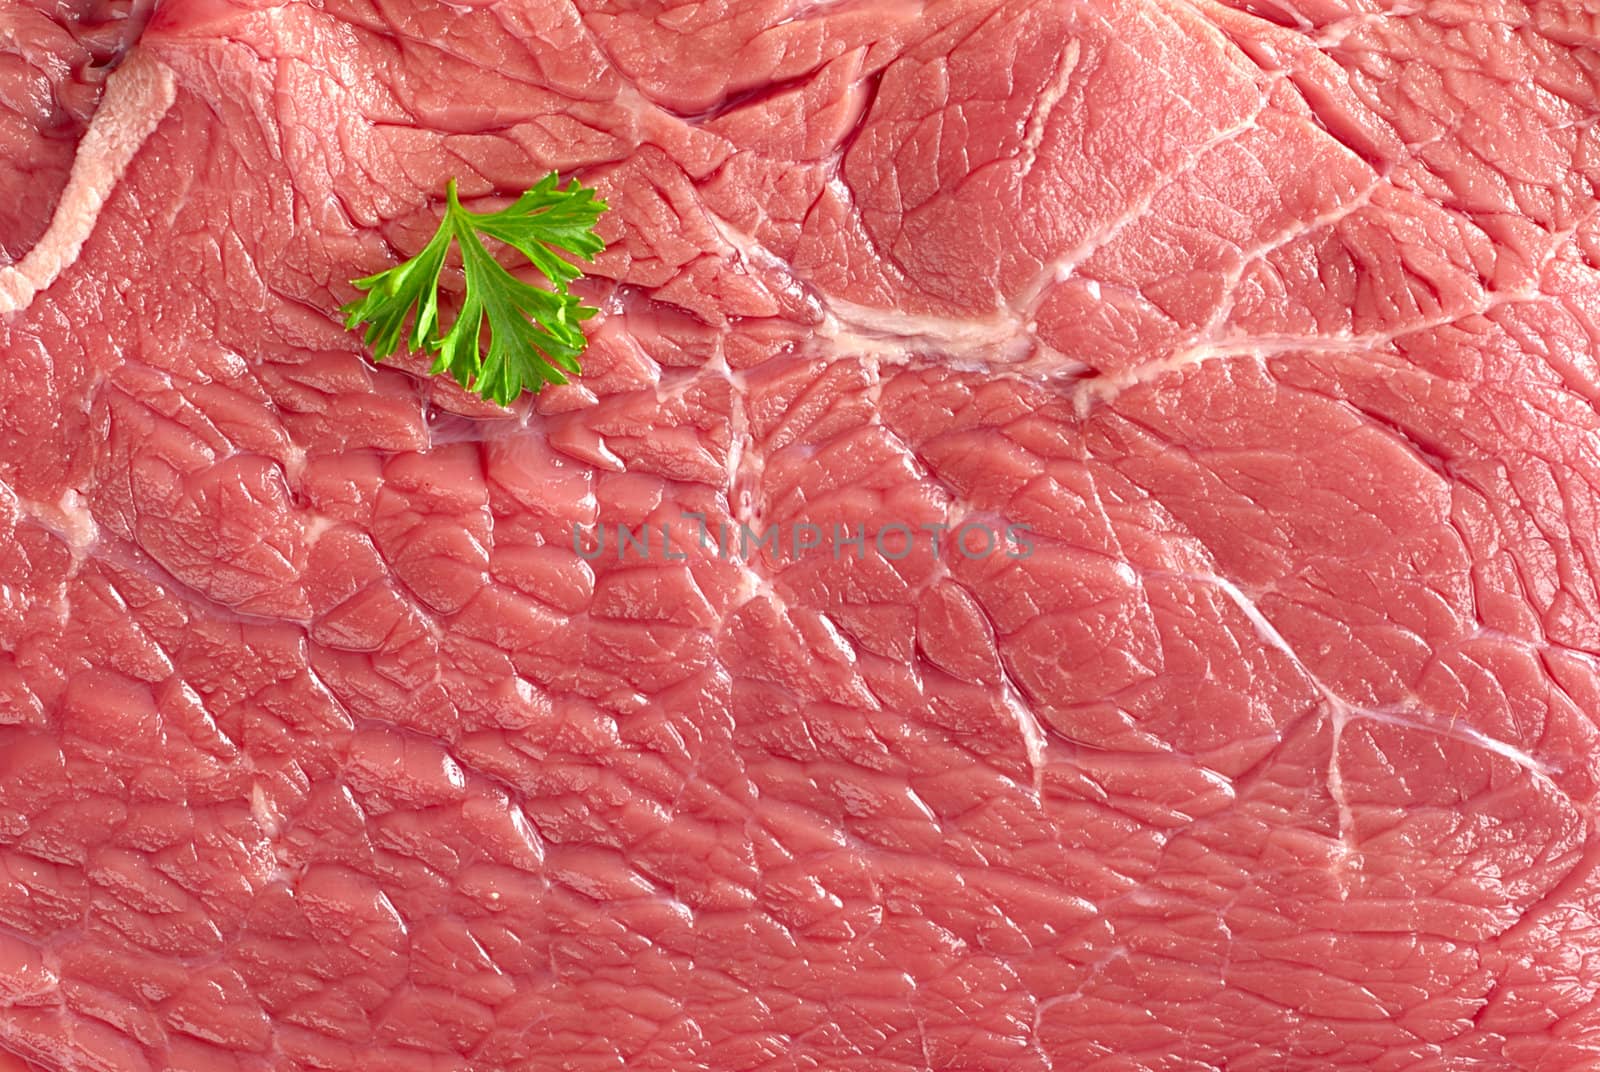 Texture and surface of fresh raw beef meat garnished with parsley